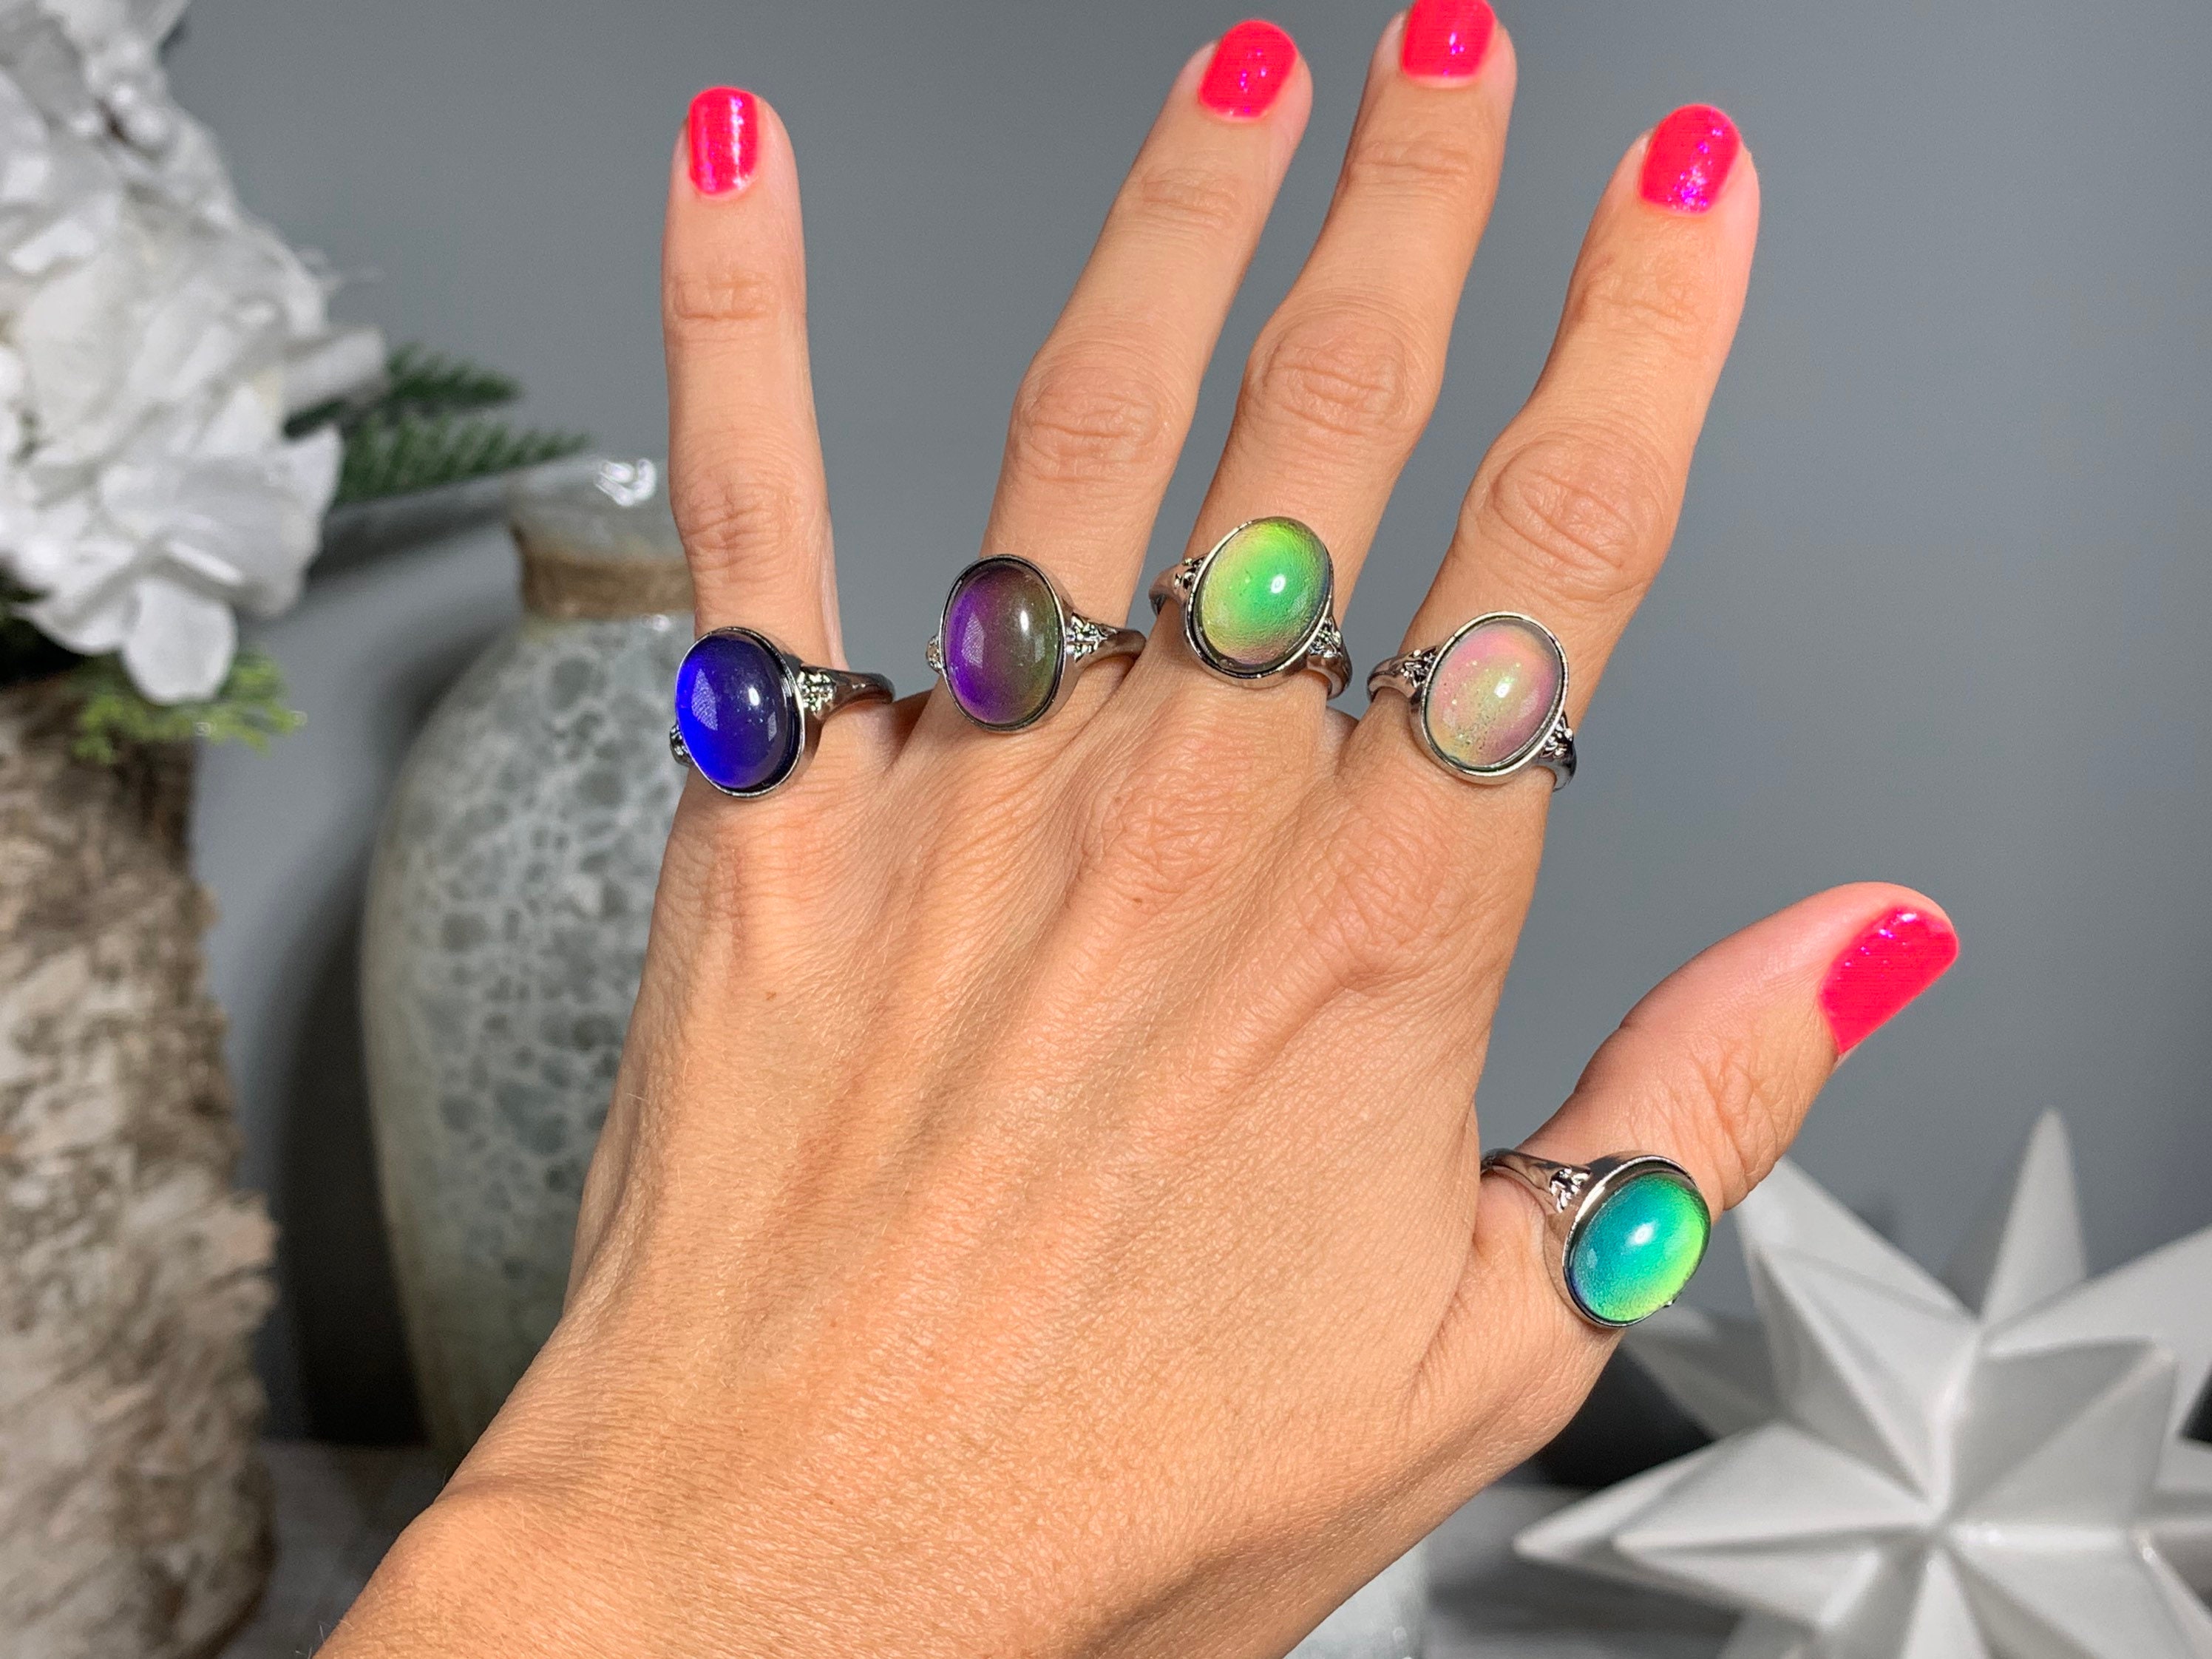 15 Pieces Mood Rings for Kids Adjustable Mixed Color Changing Mood